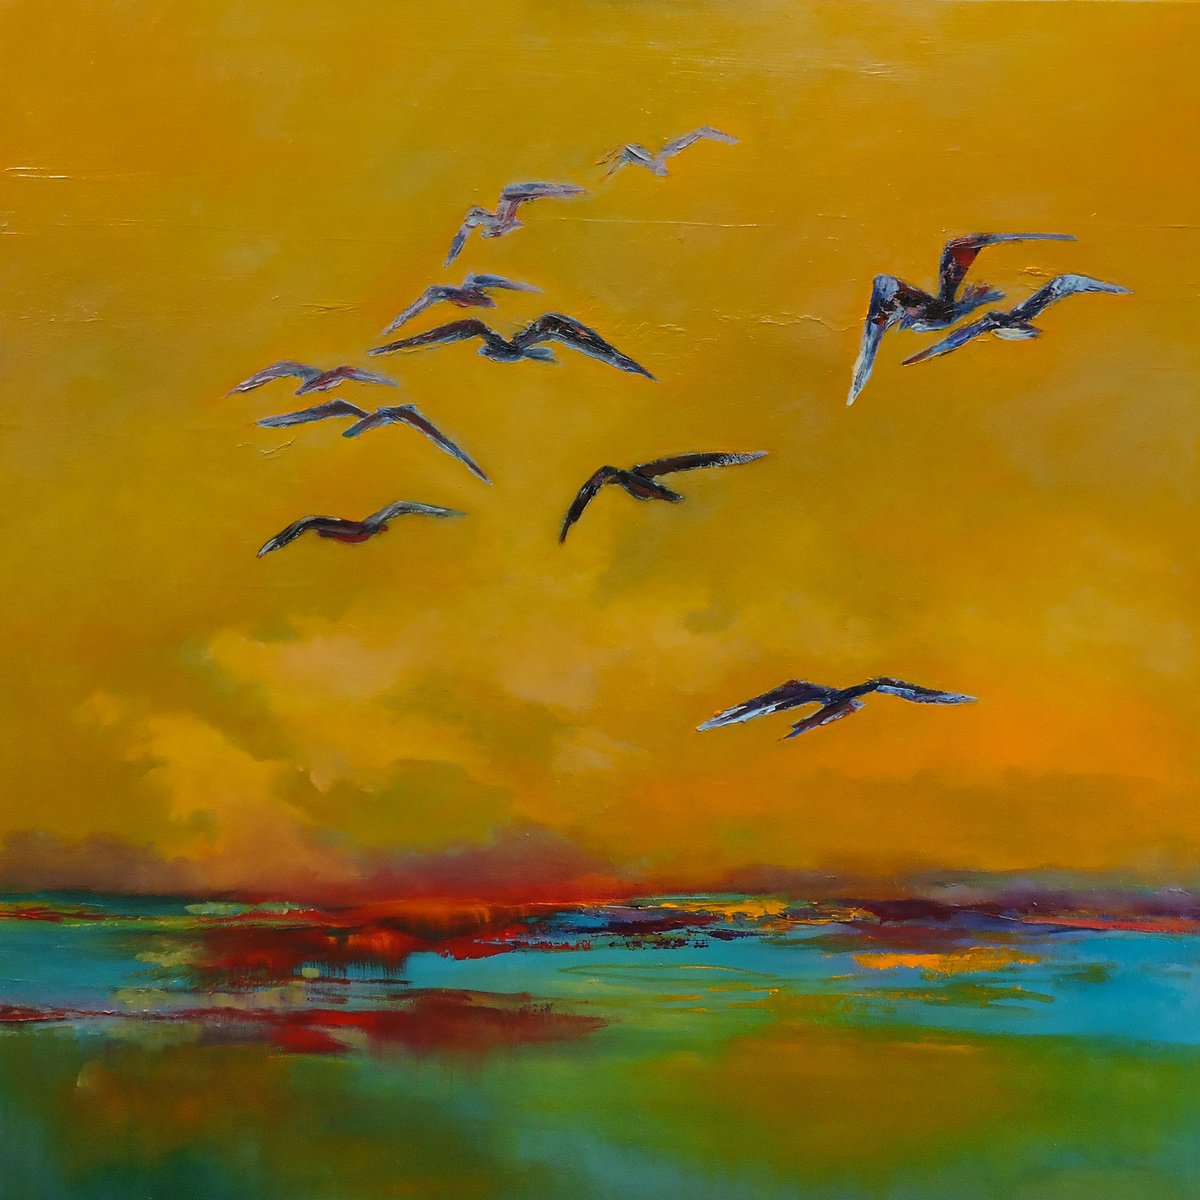 Sunset with Seagulls. by Veta Barker